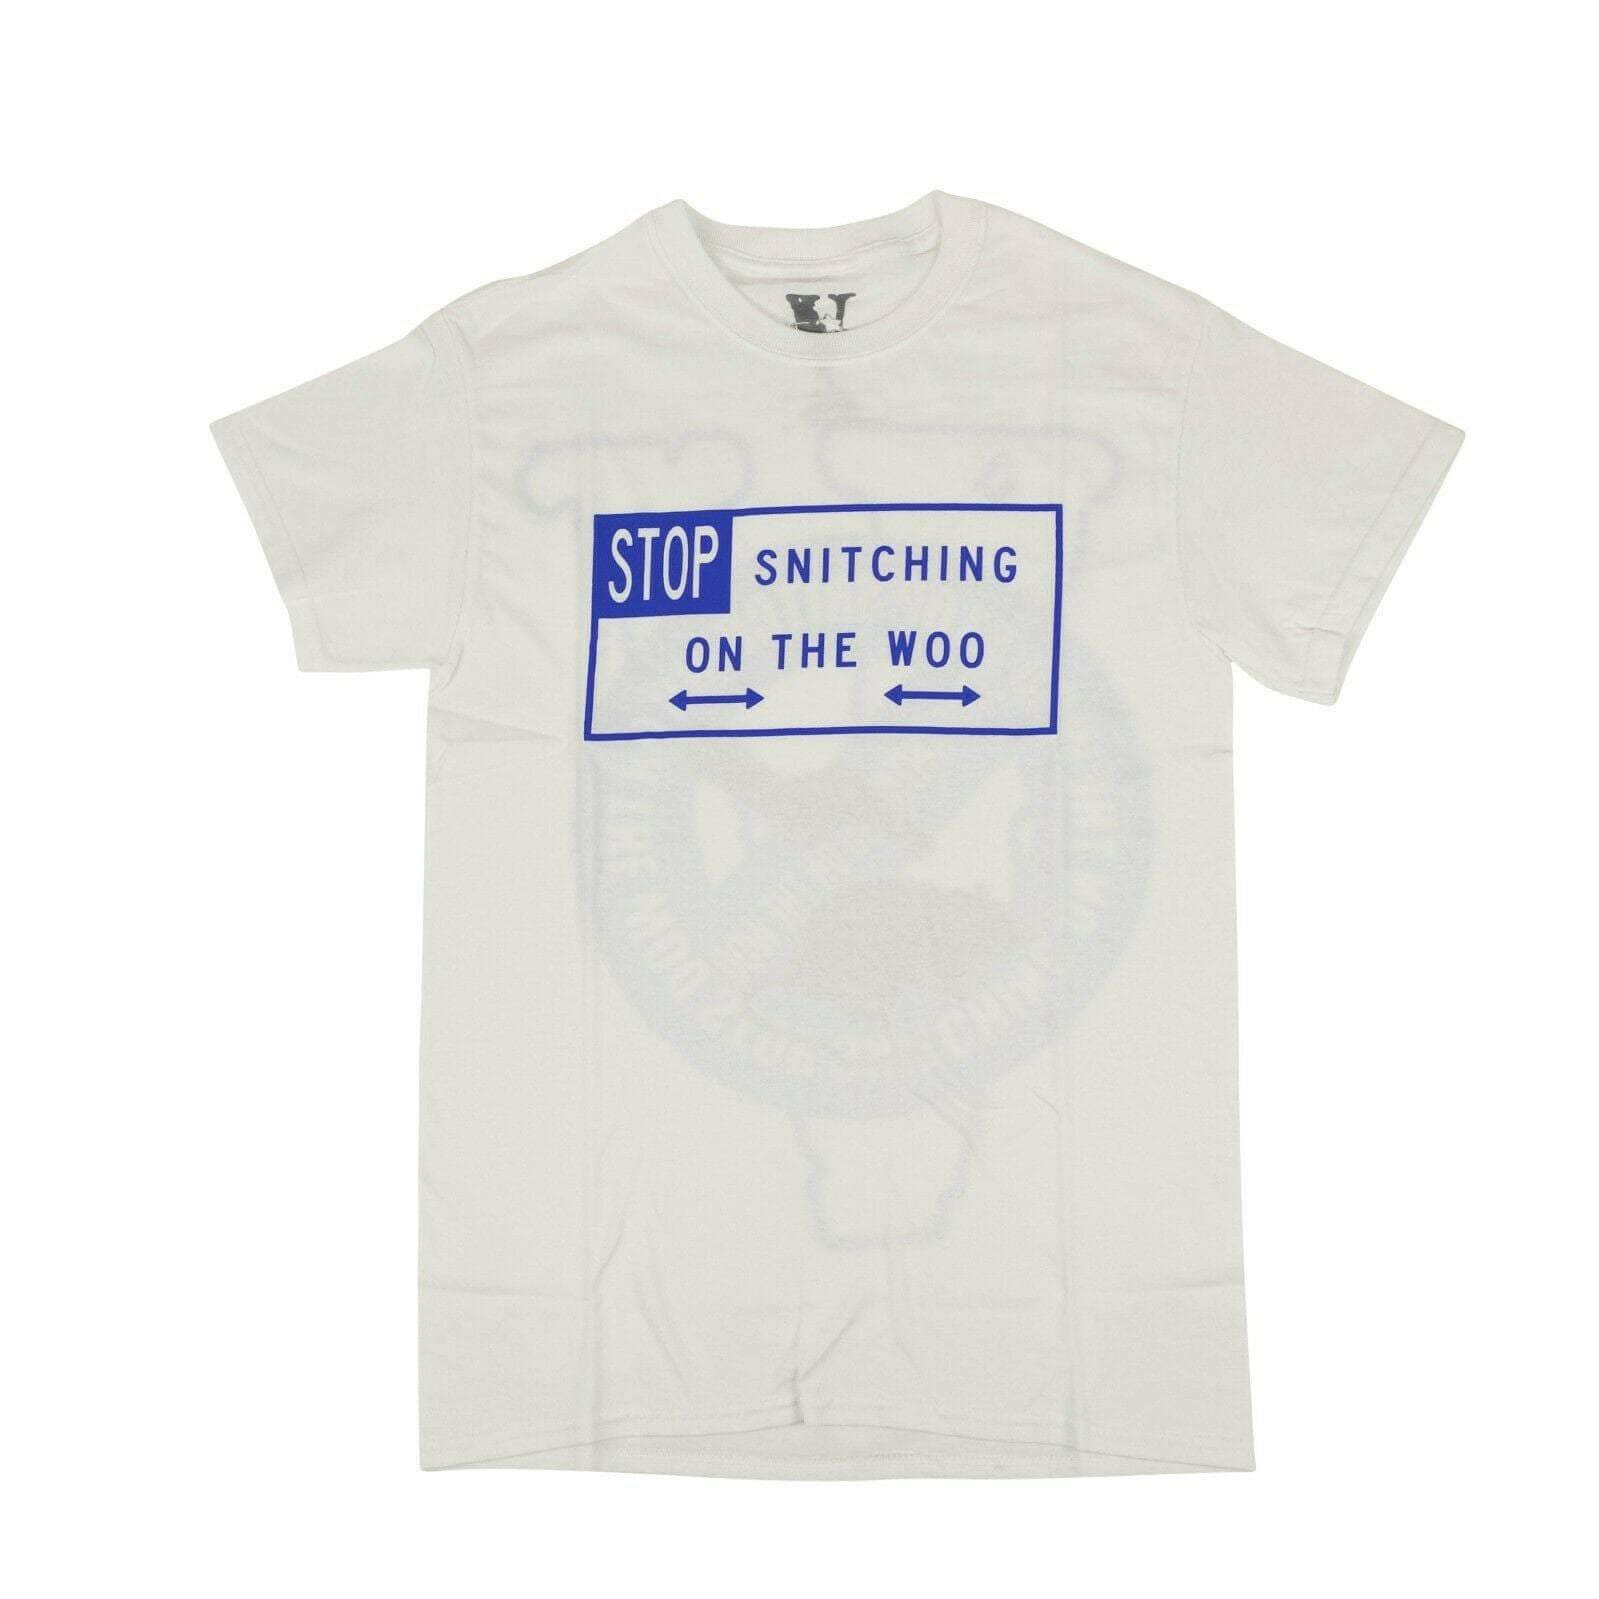 Vlone chicmi, couponcollection, gender-mens, main-clothing, mens-shoes, SPO, t-shirt, under-250, vlone XXL VLONE x POP SMOKE 'Stop Snitching' Short Sleeves T-Shirt - White/Blue 75LE-1603/XXL 75LE-1603/XXL